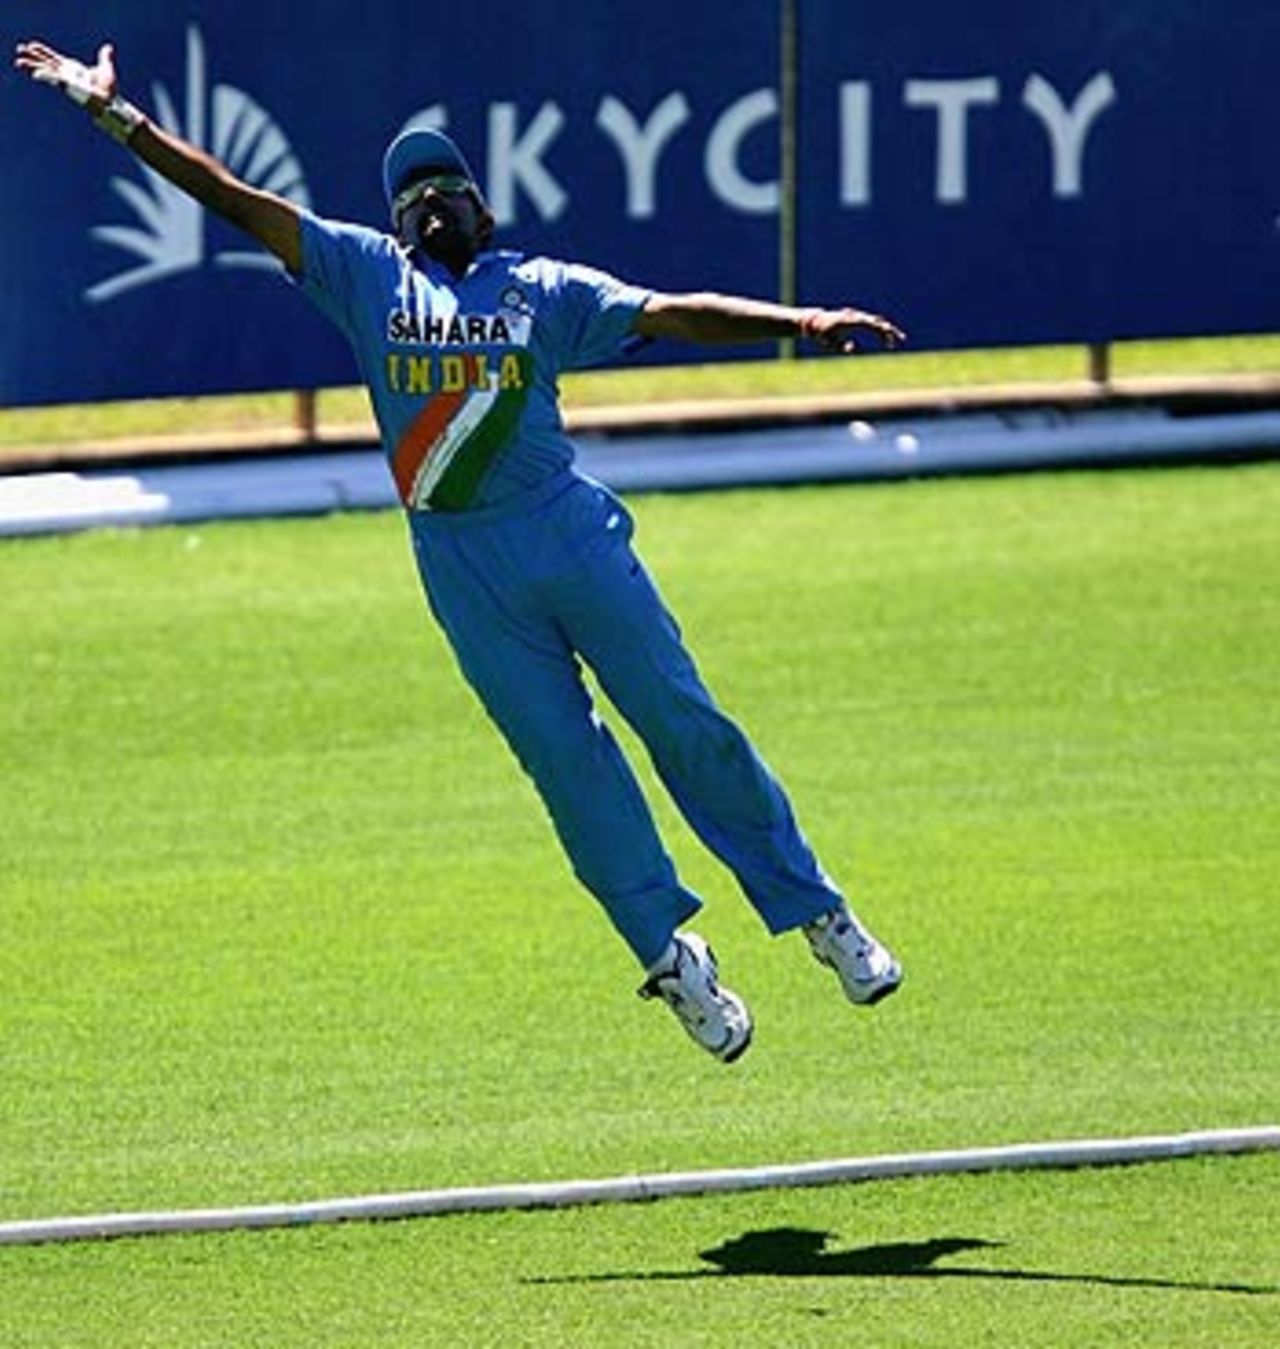 I believe I can fly: Robin Uthappa elevates himself in an attempt to catch a ball, Australia A v India A, Top End Series, Darwin, July 8, 2006